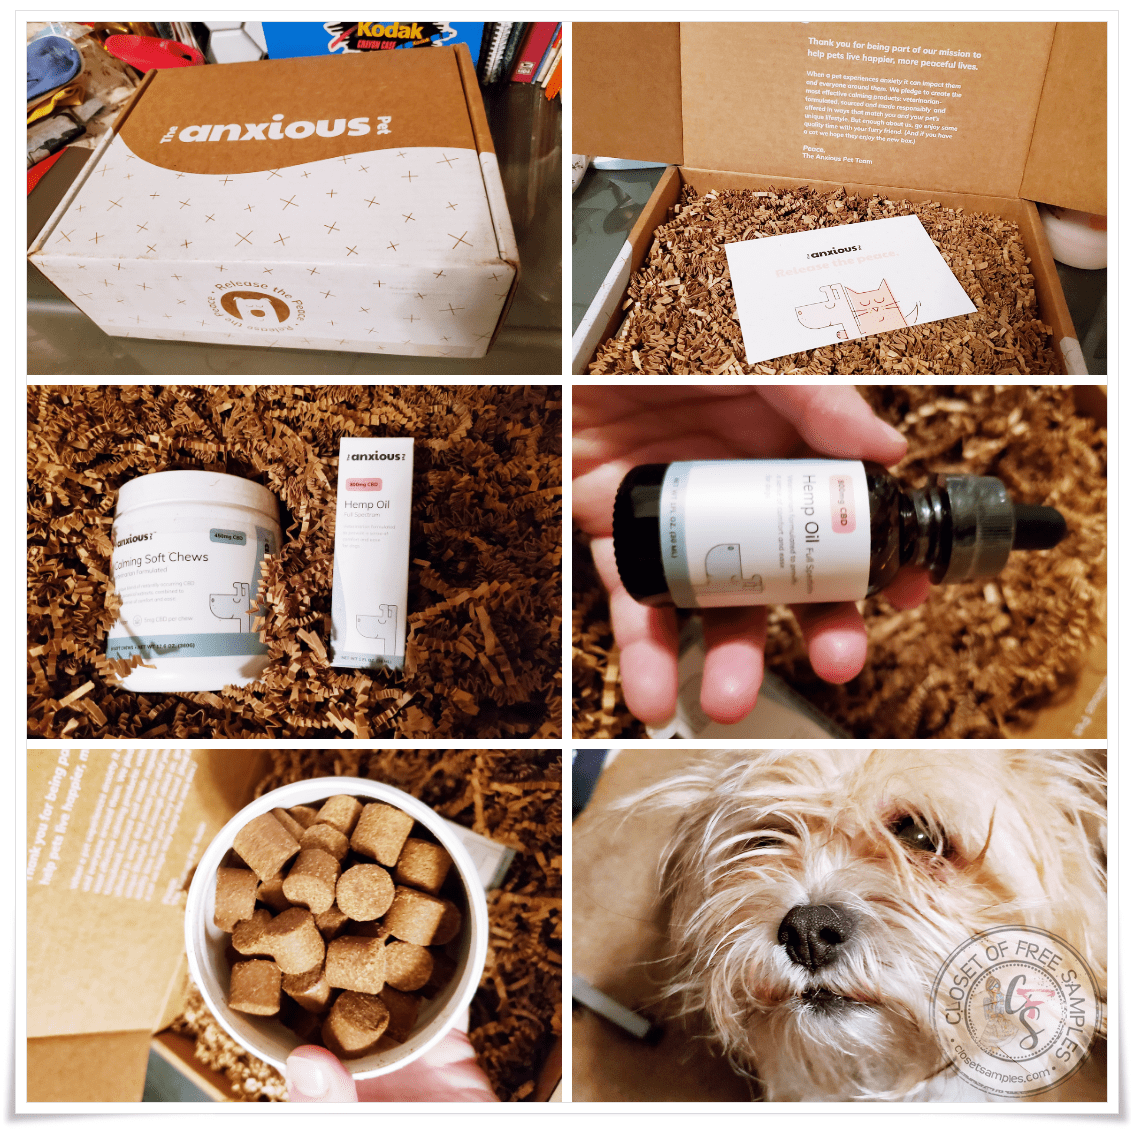 The Anxious Pet Calming Kit for Dogs Review